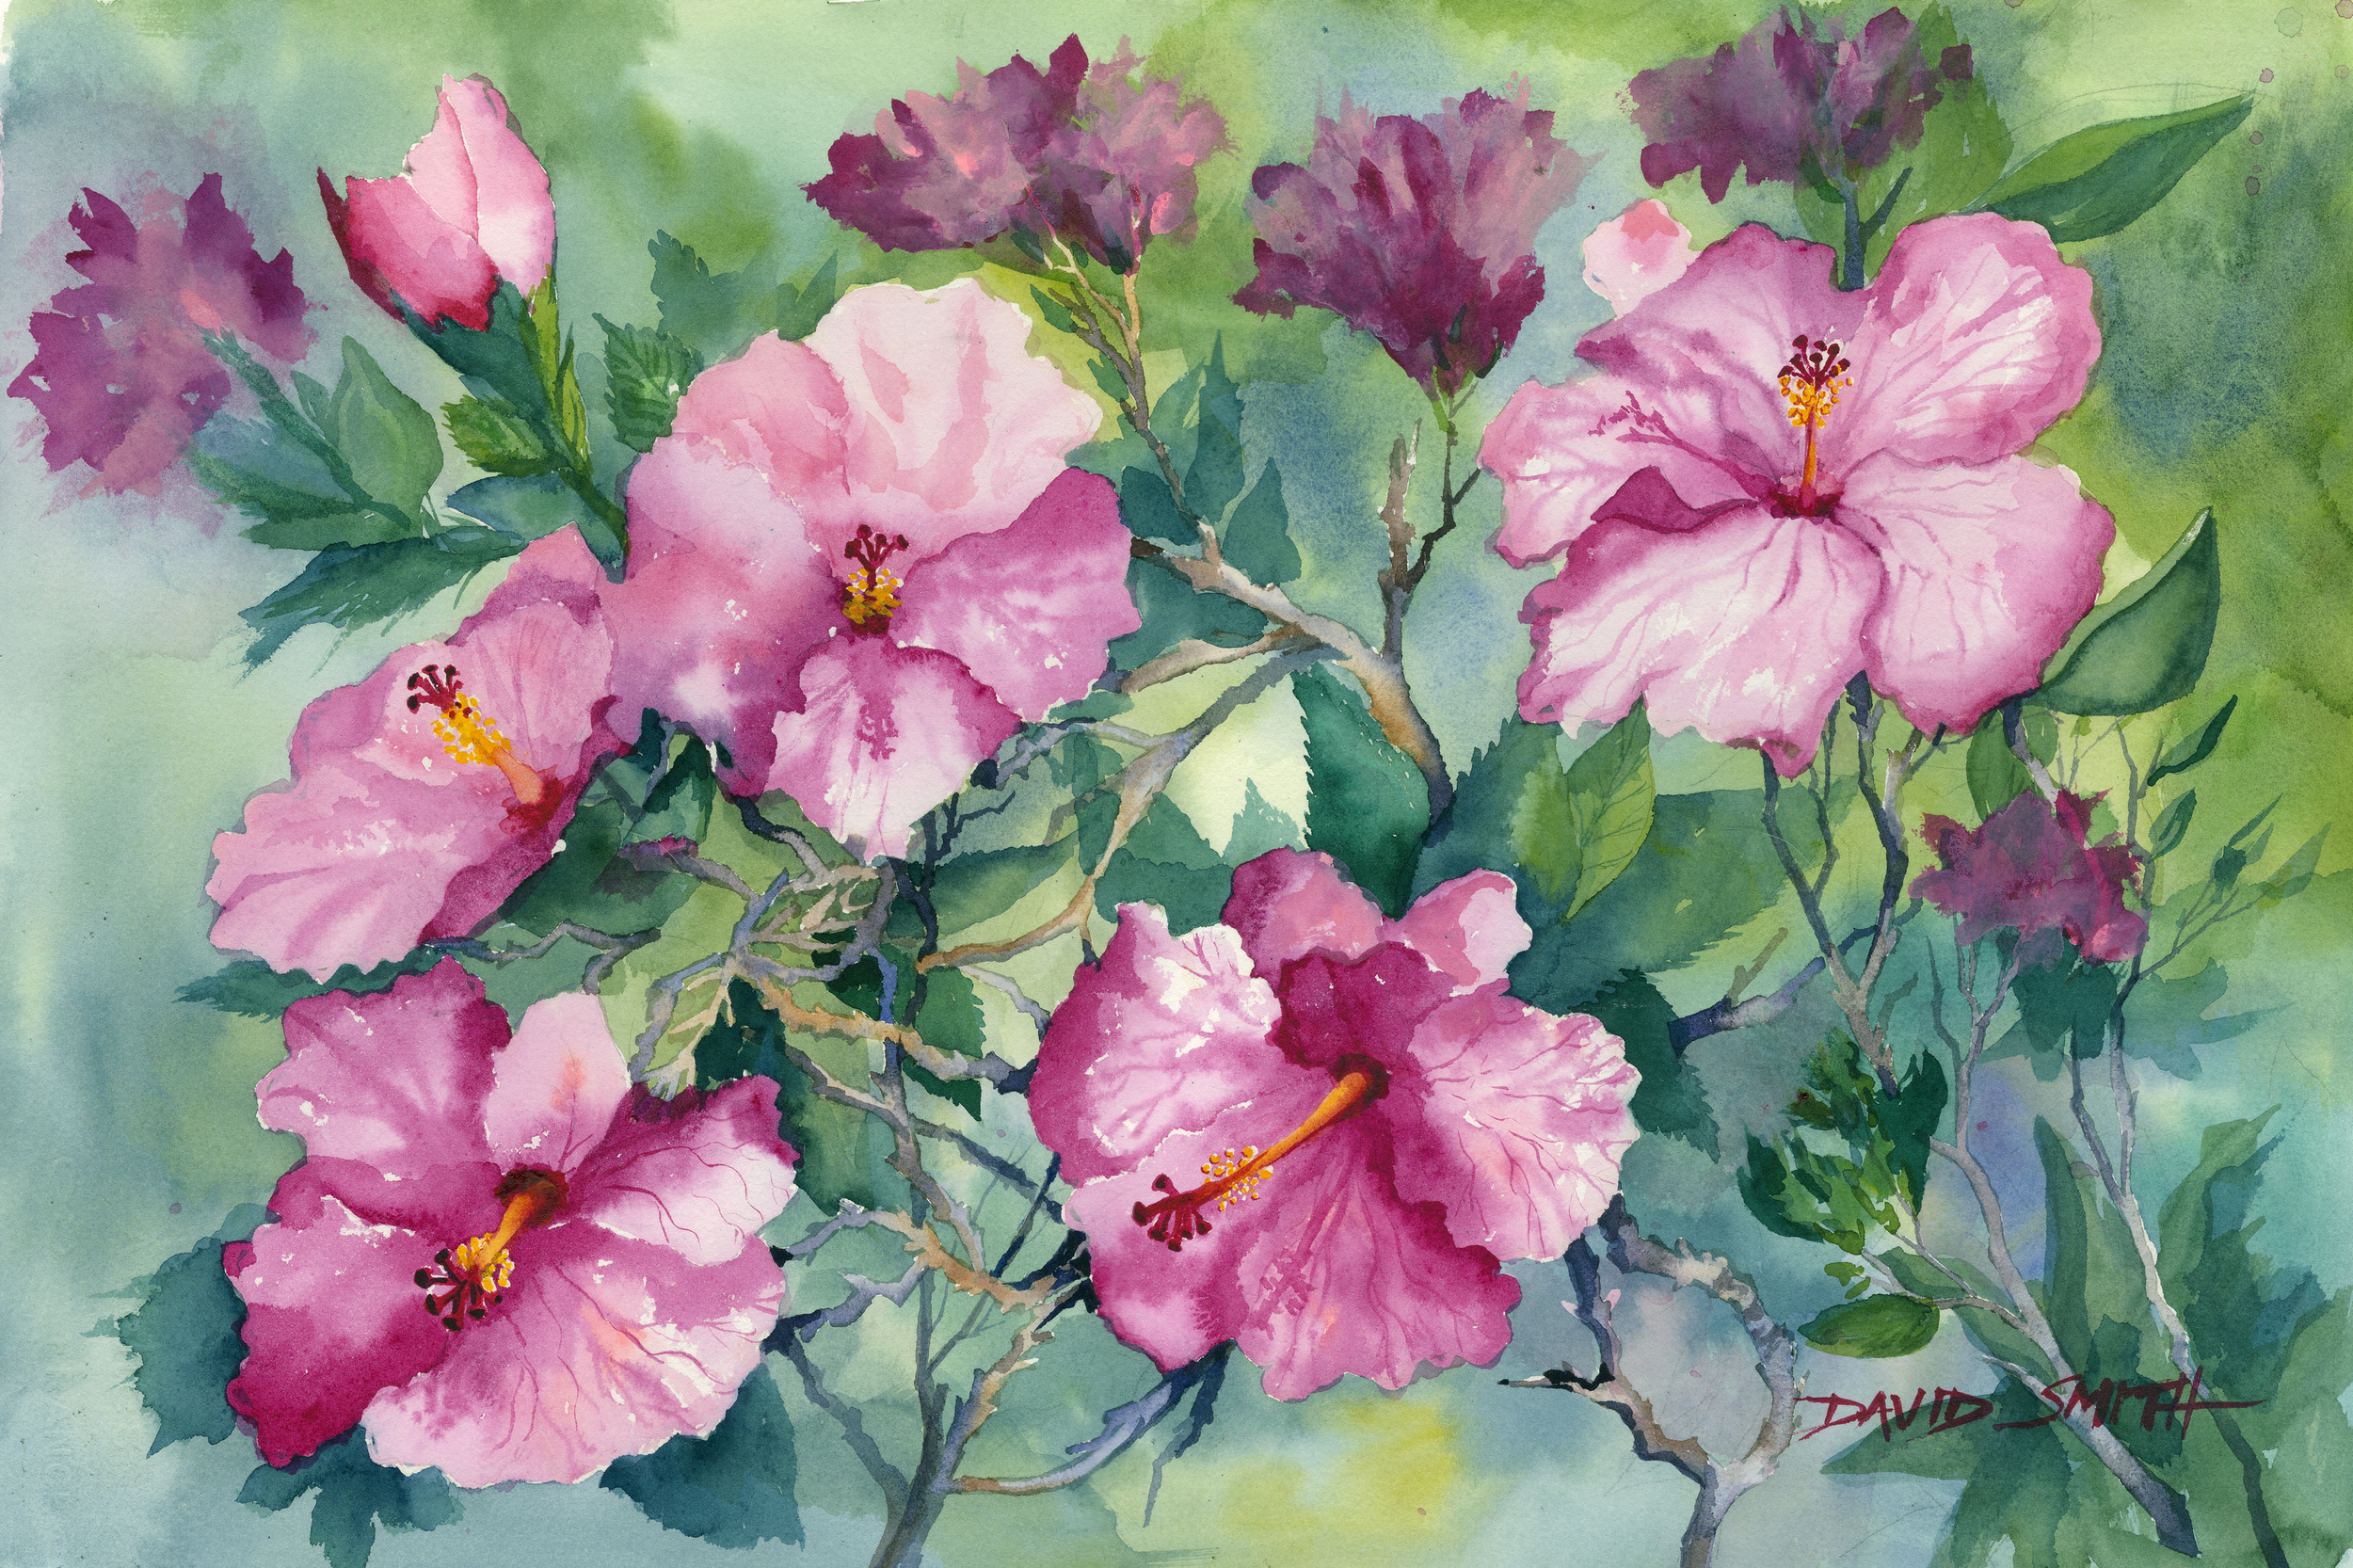 "Hibiscus #1" - Sold - Prints Available